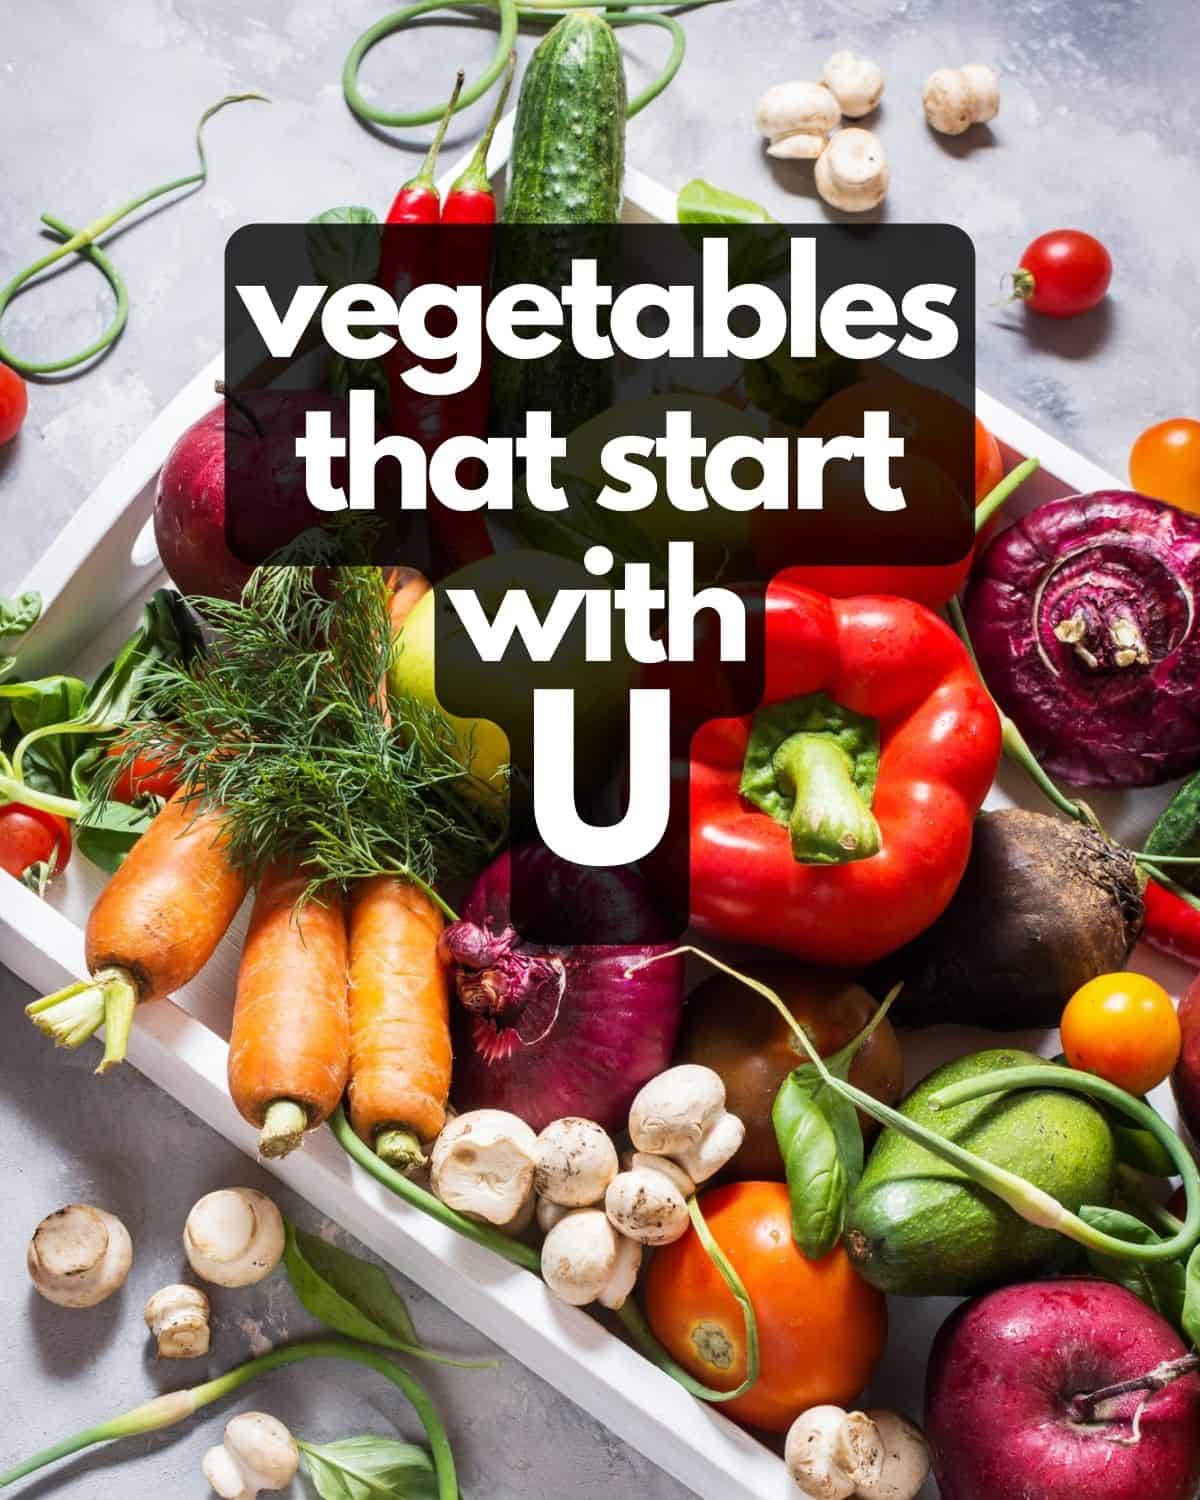 Table of vegetables, plus text: Vegetables that start with U.